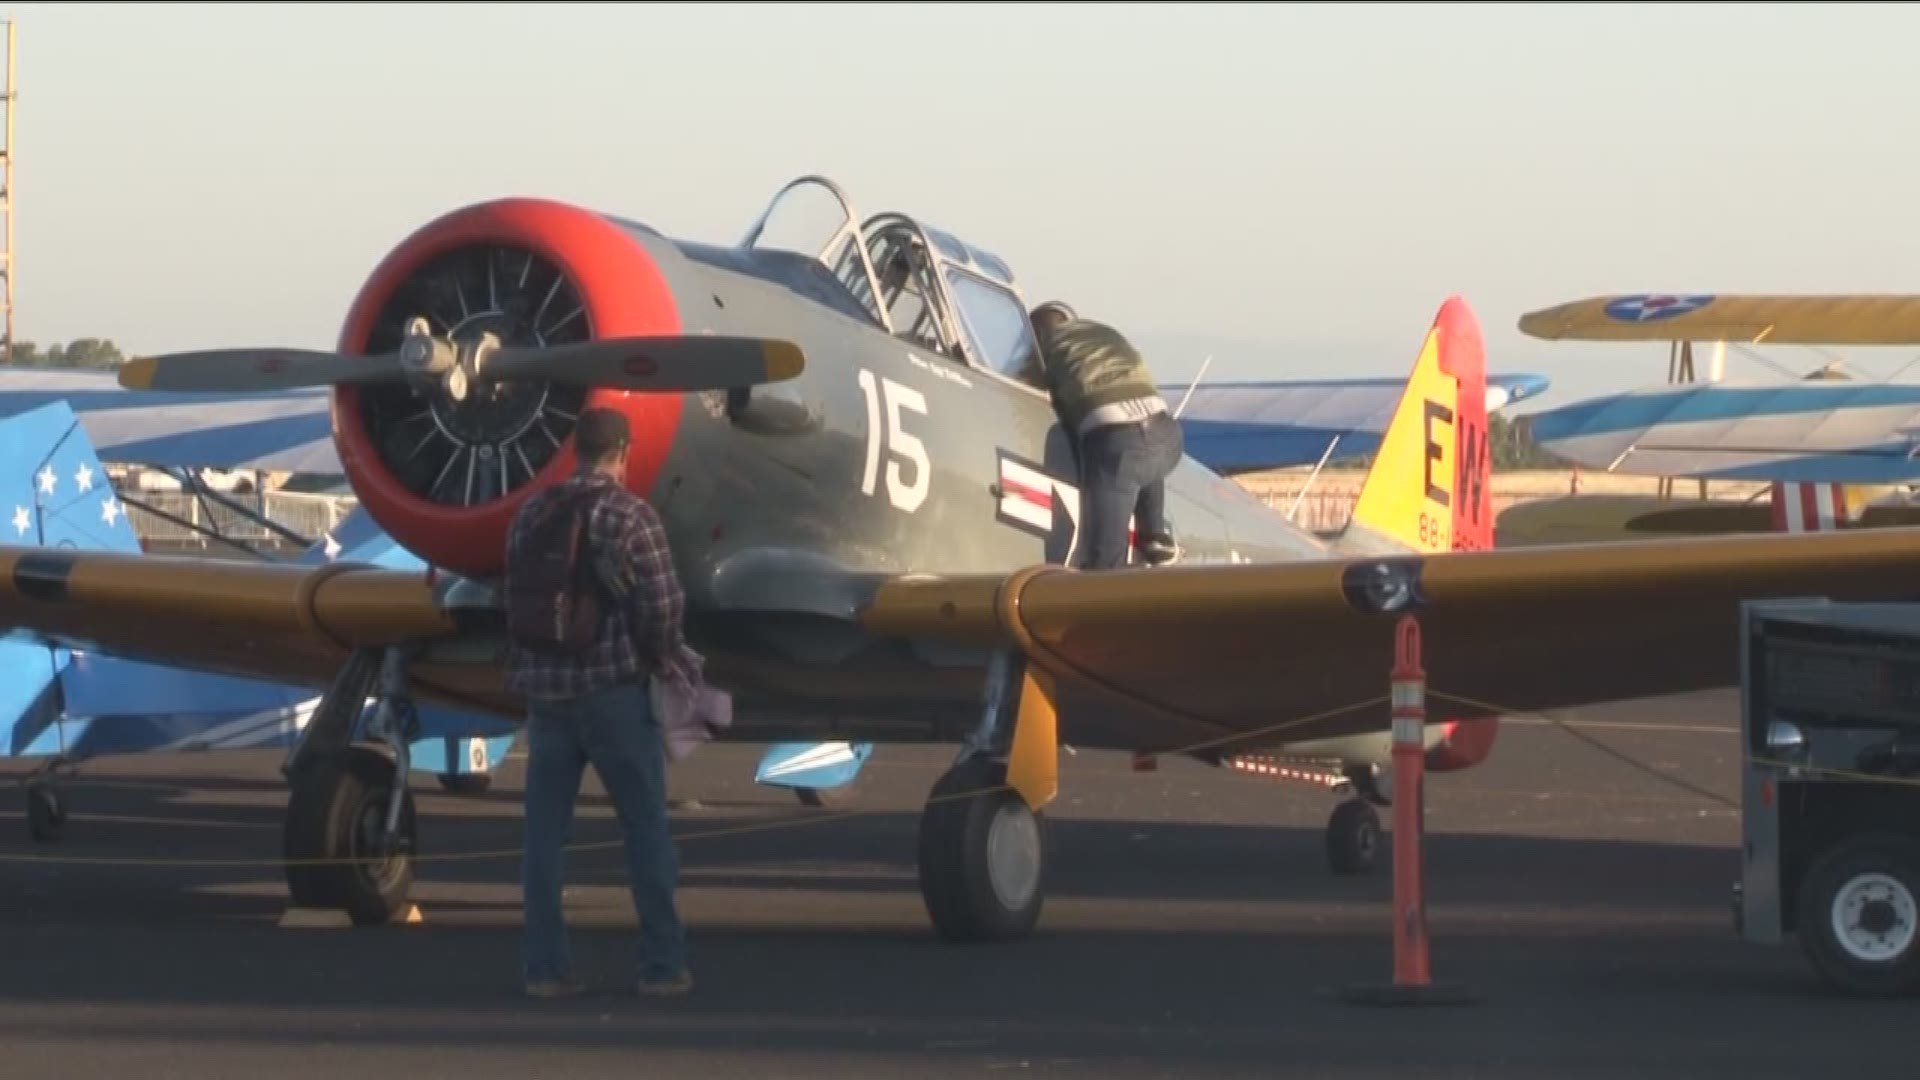 More than 50 planes were on display Saturday for the Lincoln Airfest, including fighter planes that were key to the war effort during World War II.